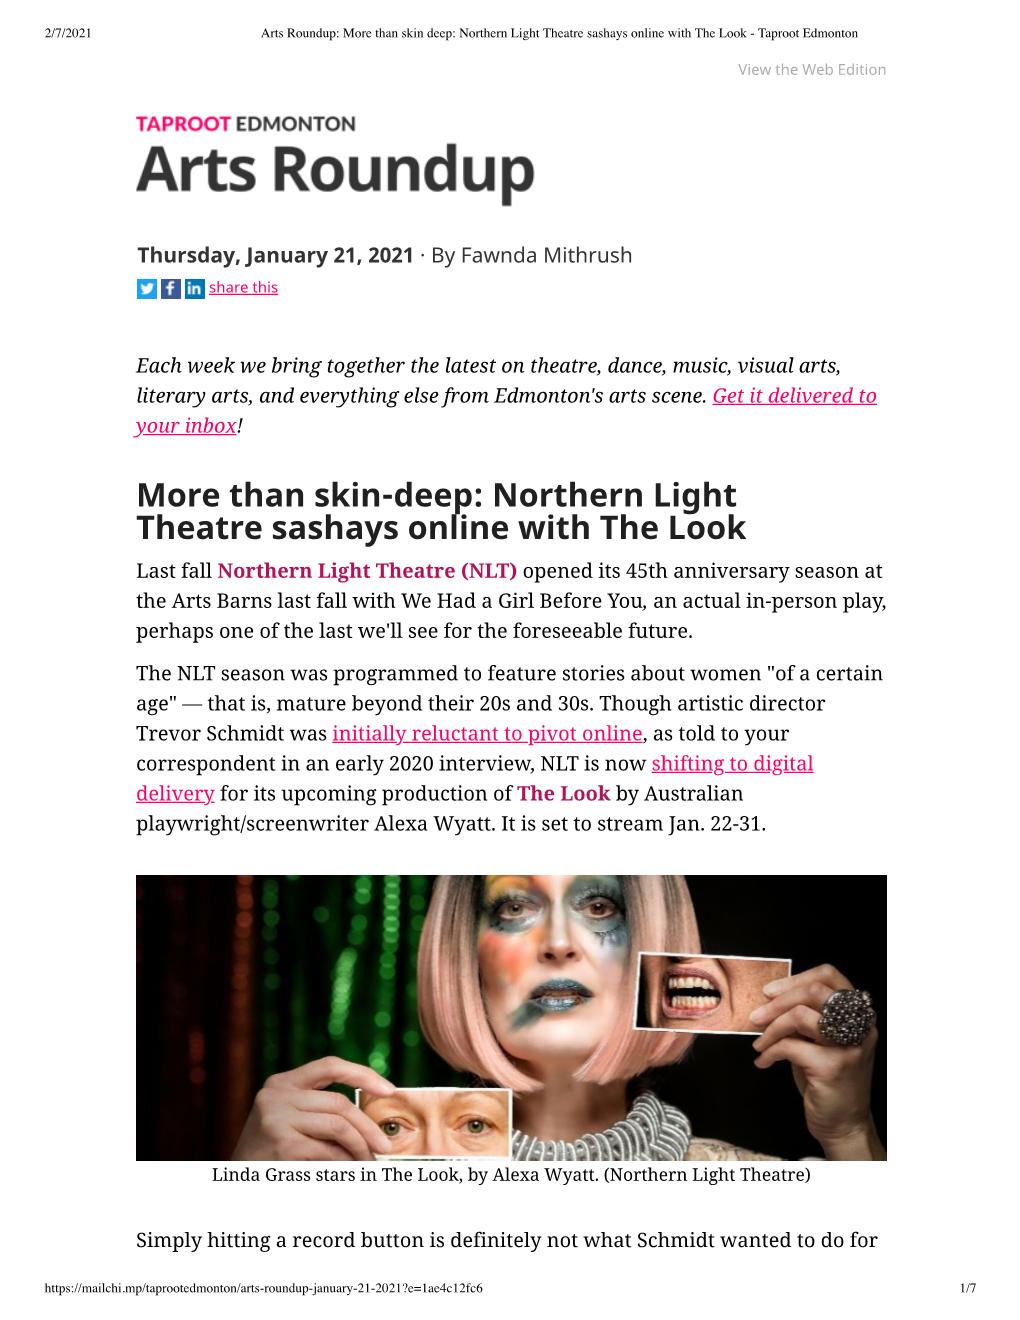 More Than Skin-Deep: Northern Light Theatre Sashays Online with the Look